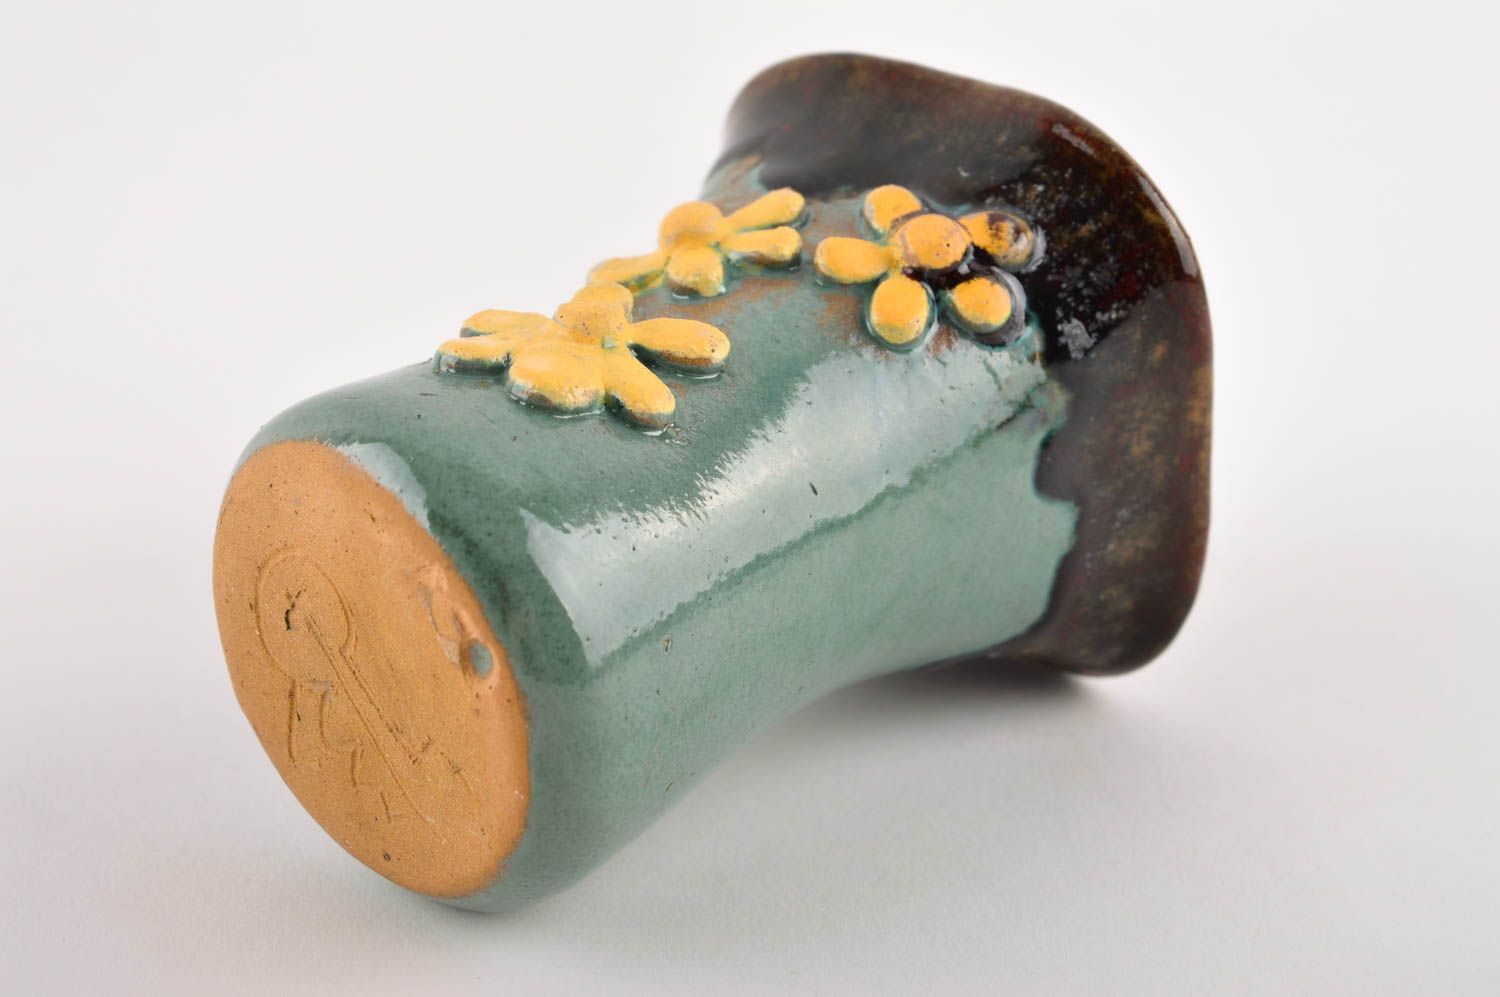 5 oz ceramic glazed handmade flower vase in green and brown color with yellow flowers photo 3